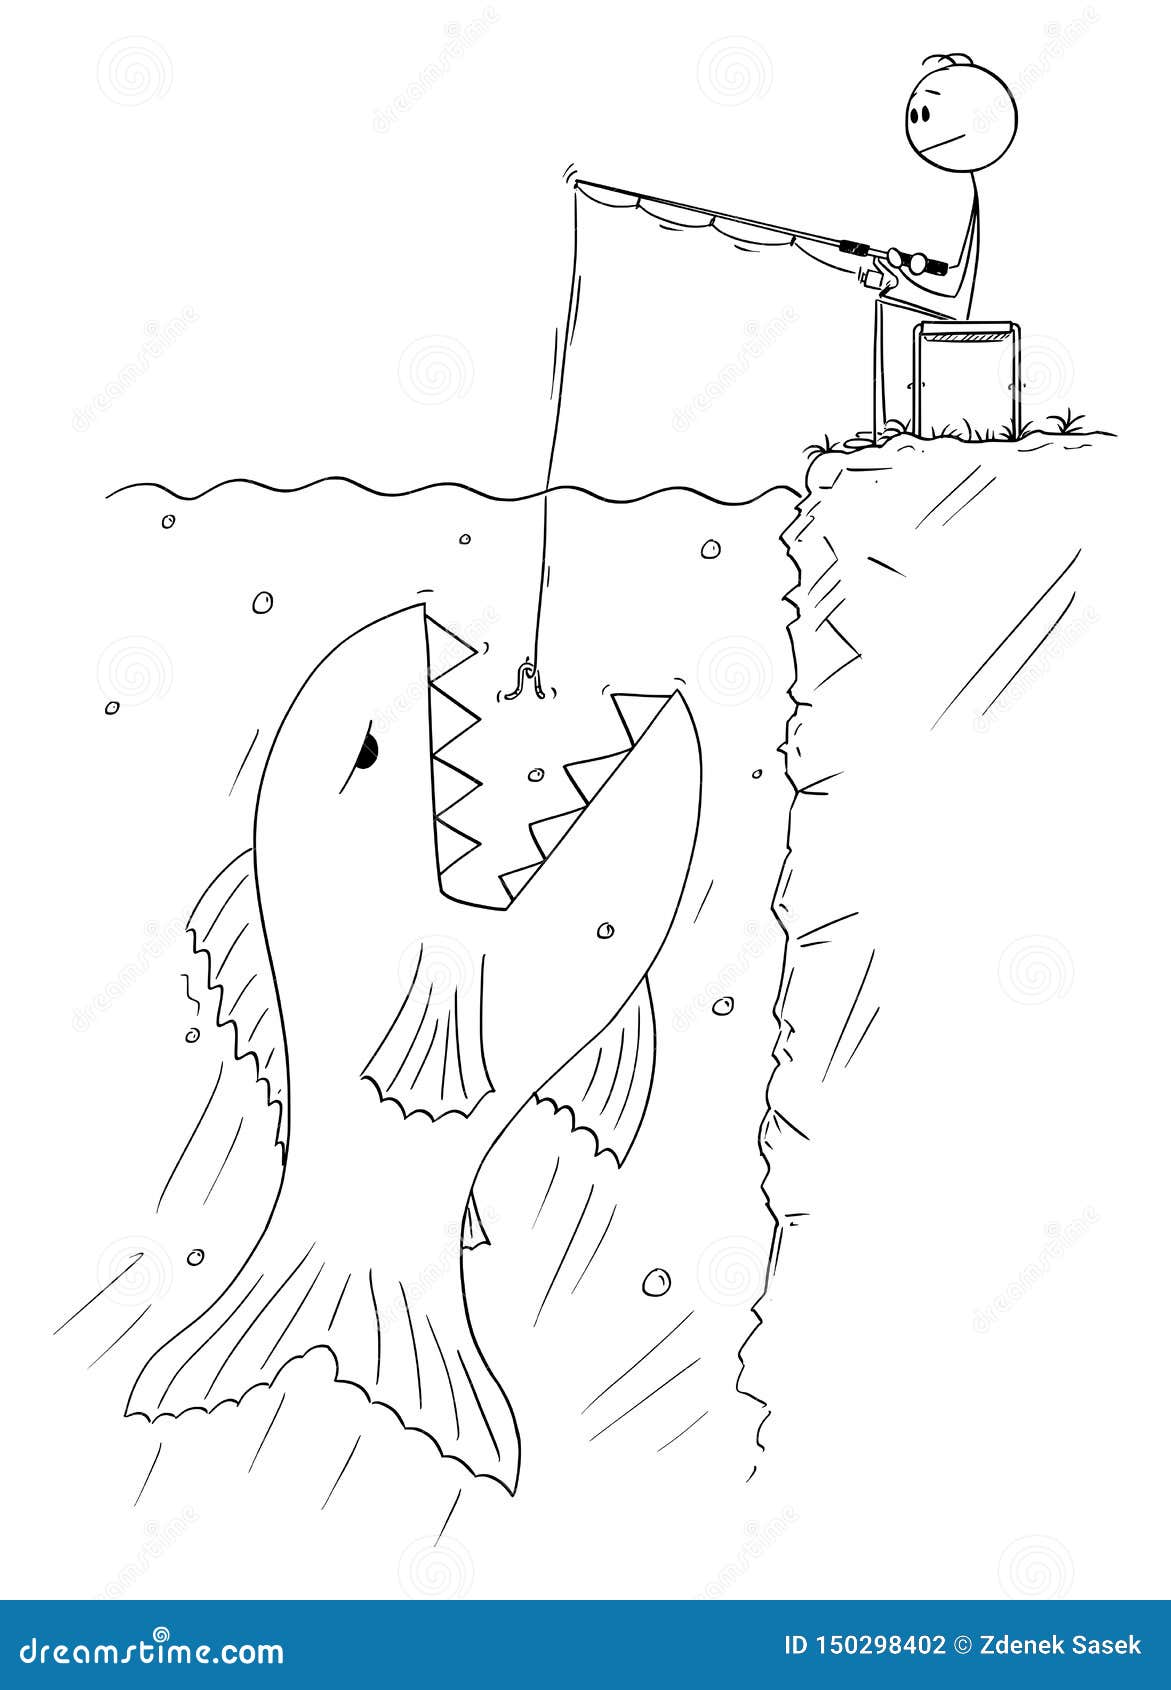  cartoon of man or fisherman sitting and angling or fishing while giant fish is floating to eat the bait